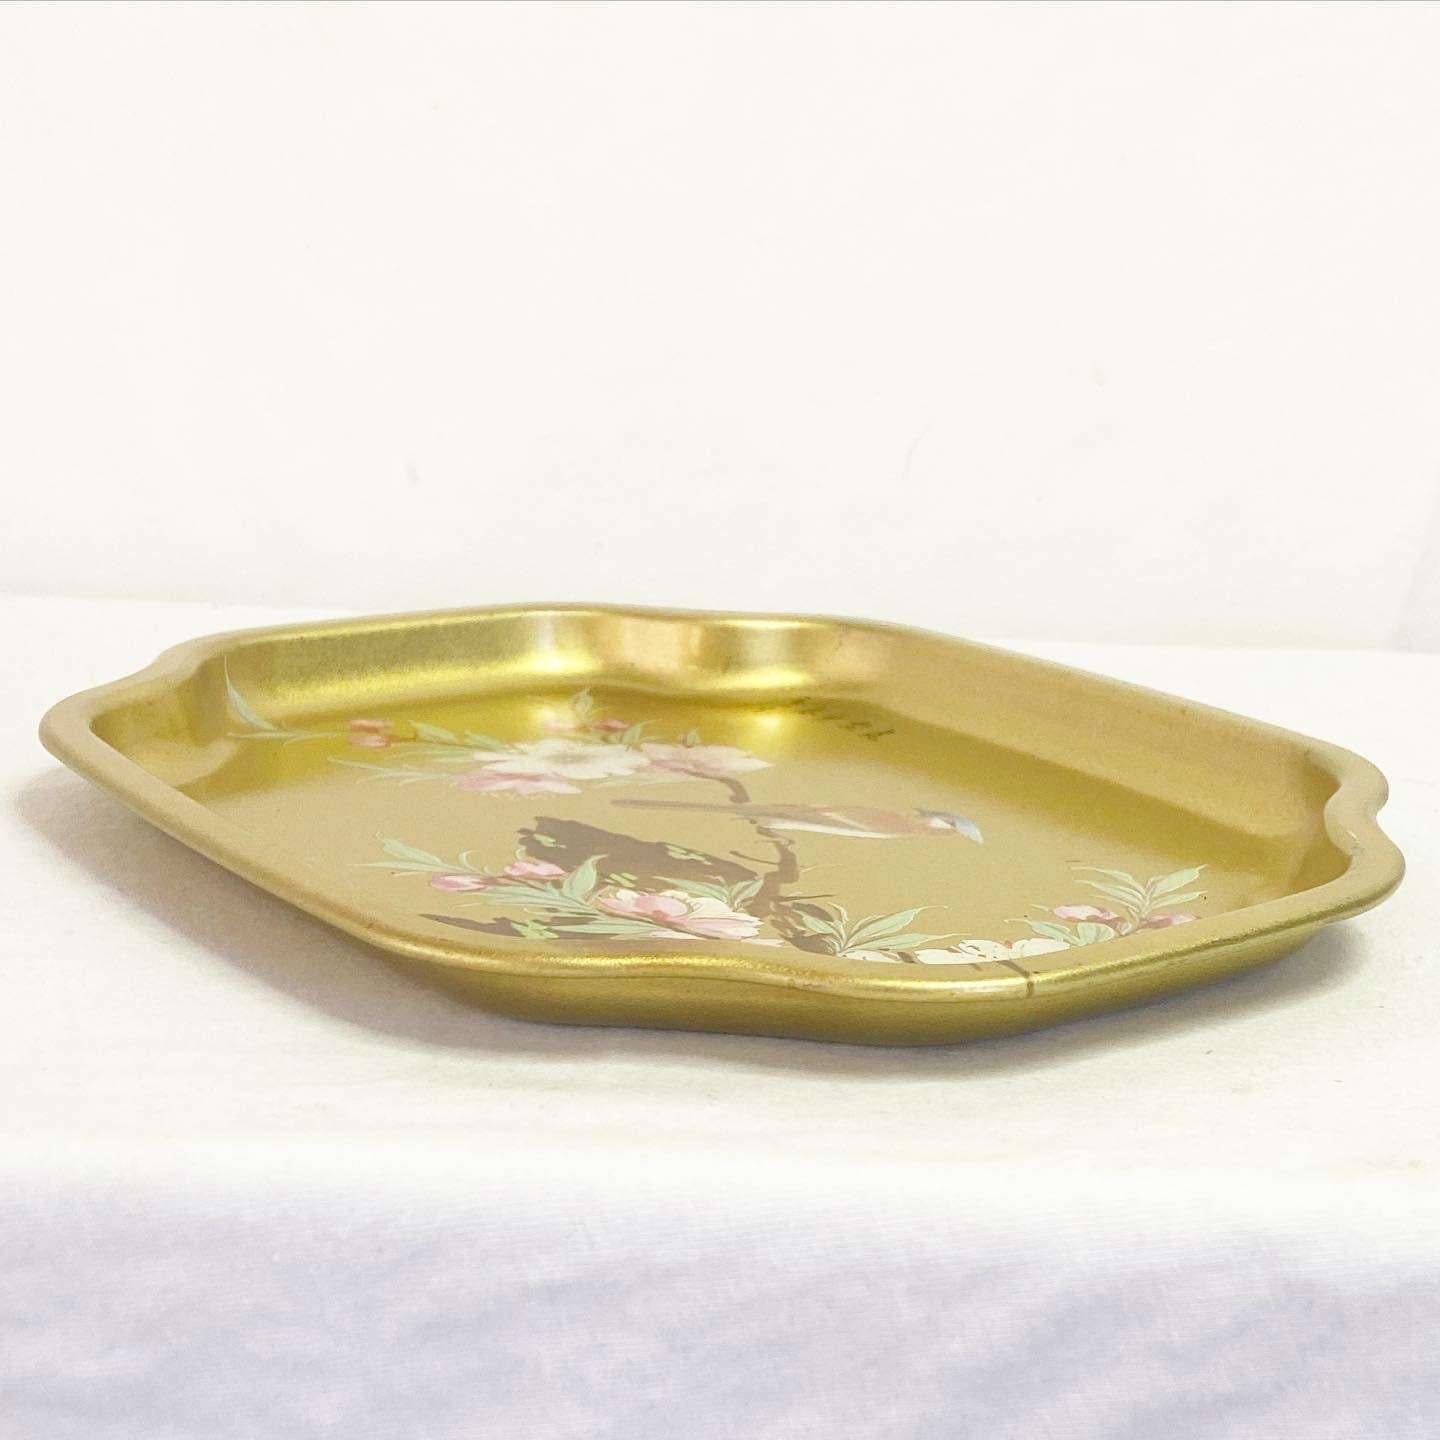 Mid-20th Century Vintage Chinoiserie Elite Gold Aviary and Blossoms Trays - 8 Pieces For Sale